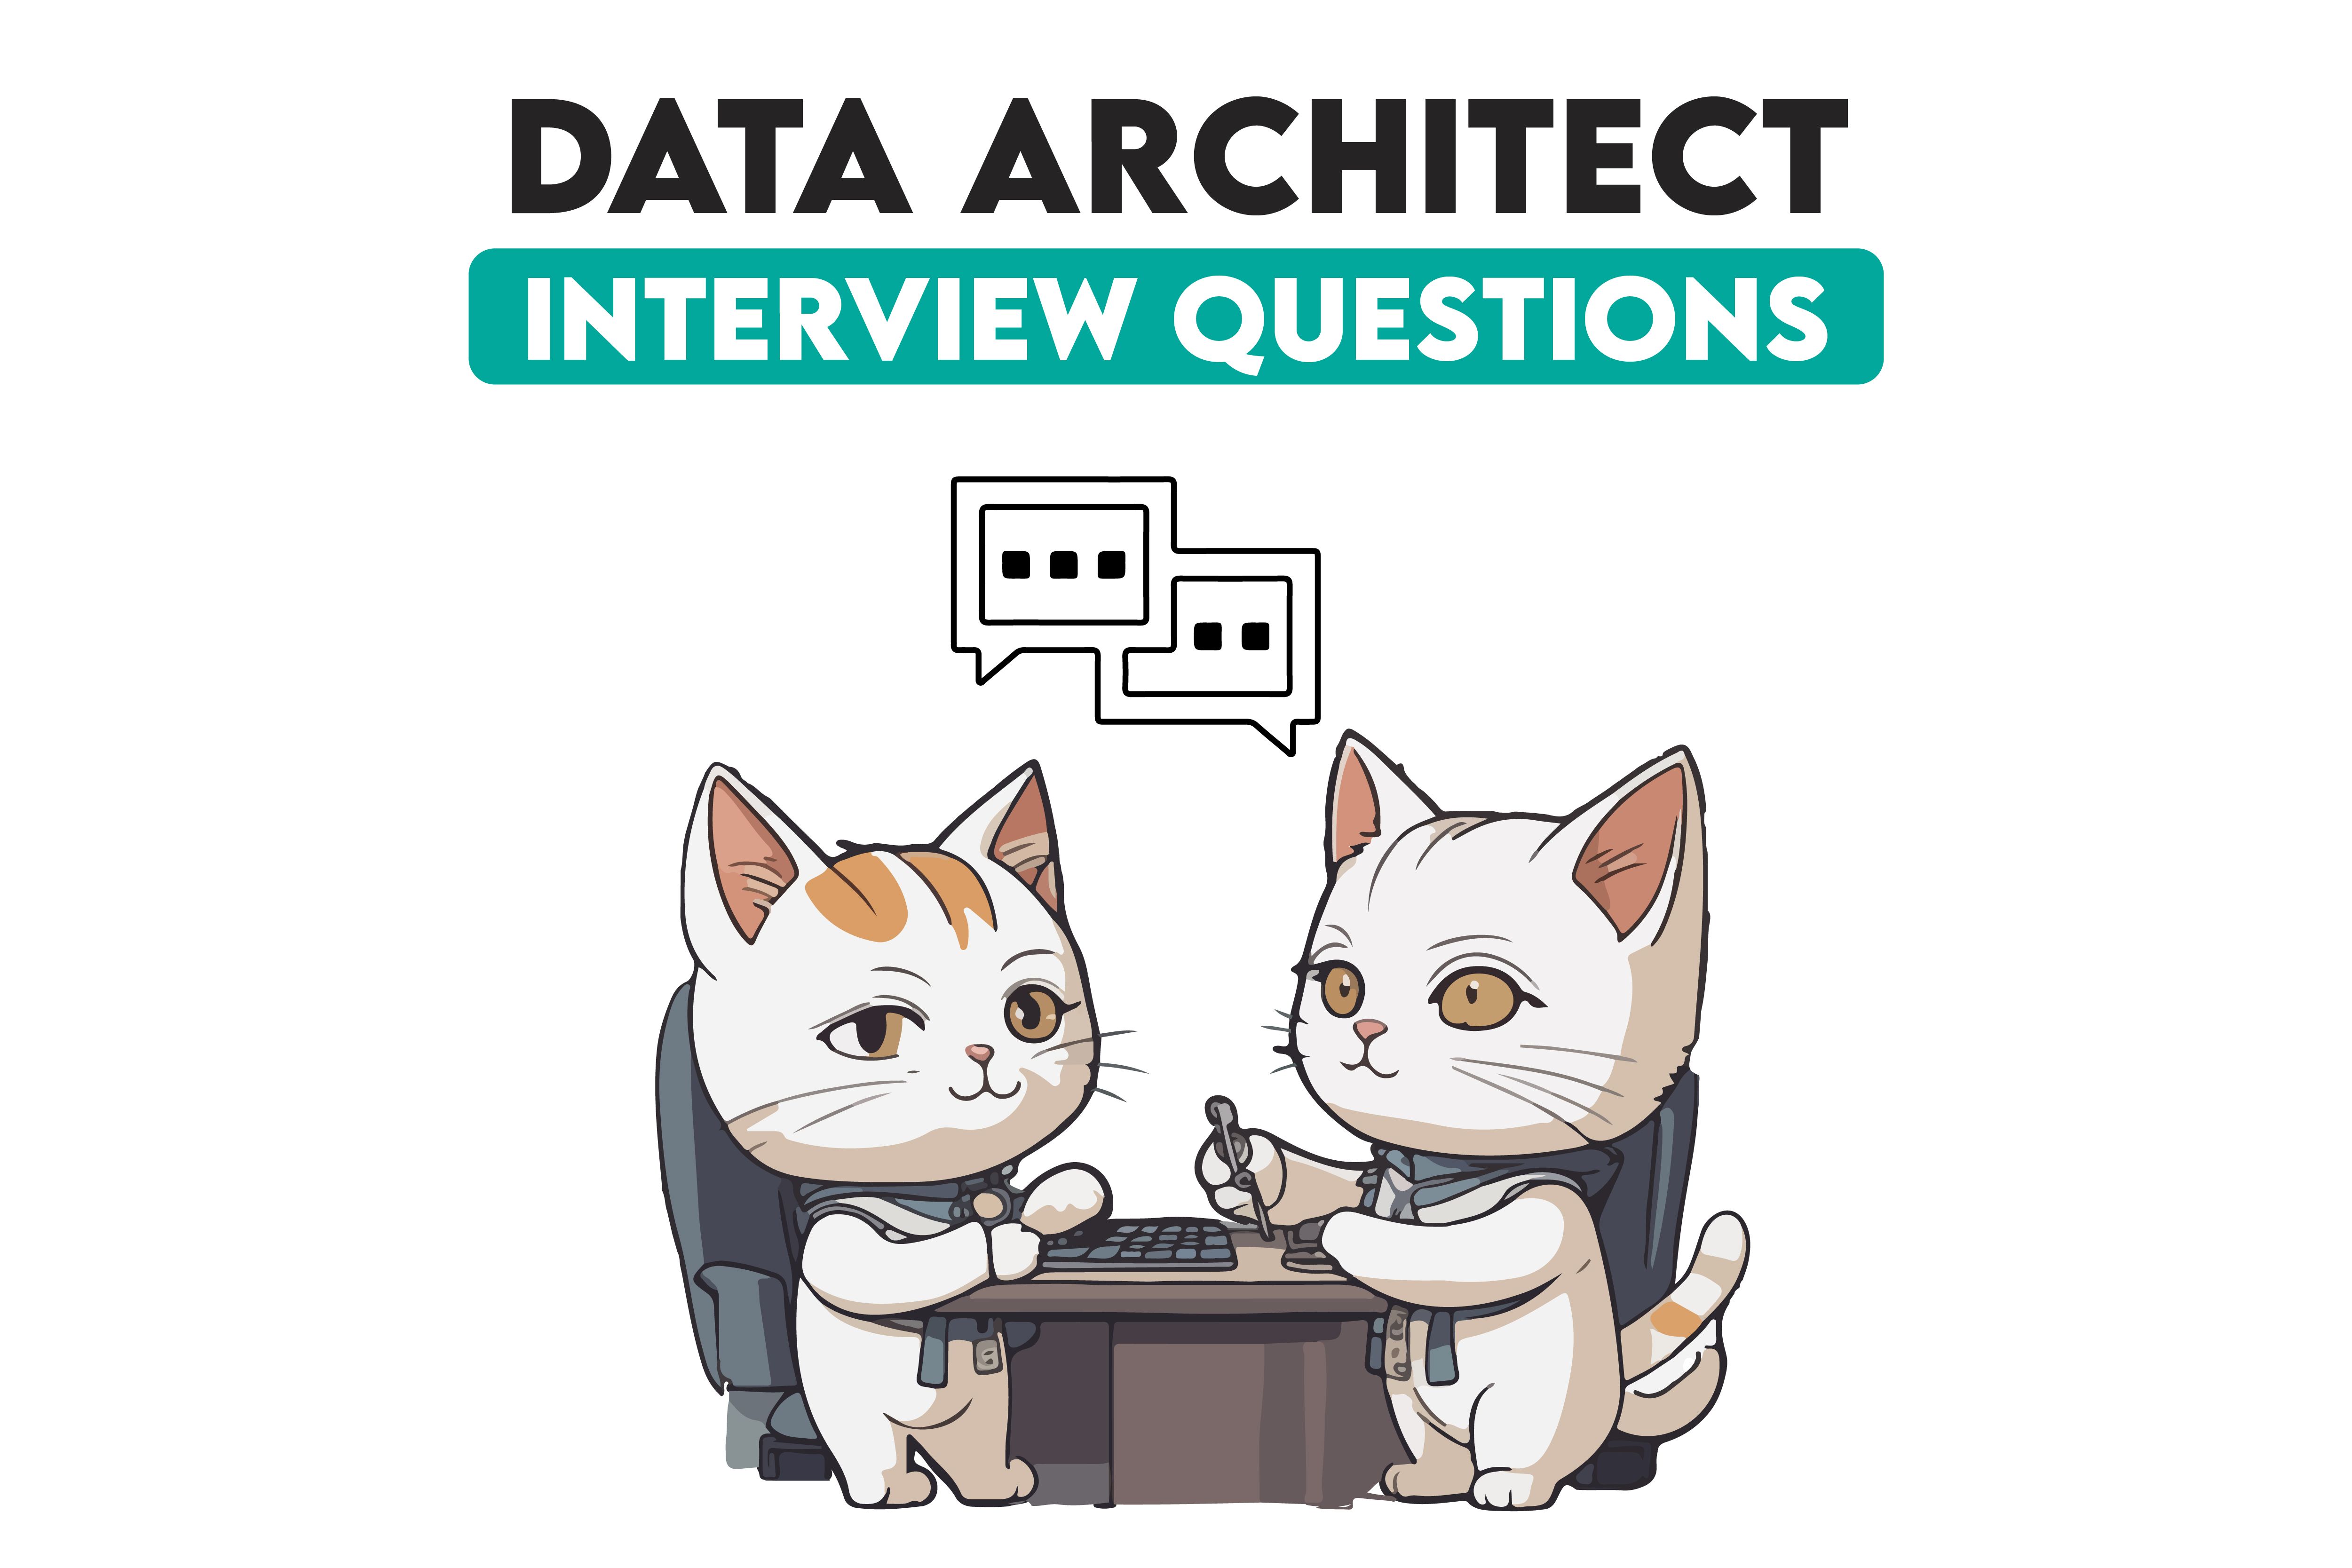 Data Architect Interview Questions